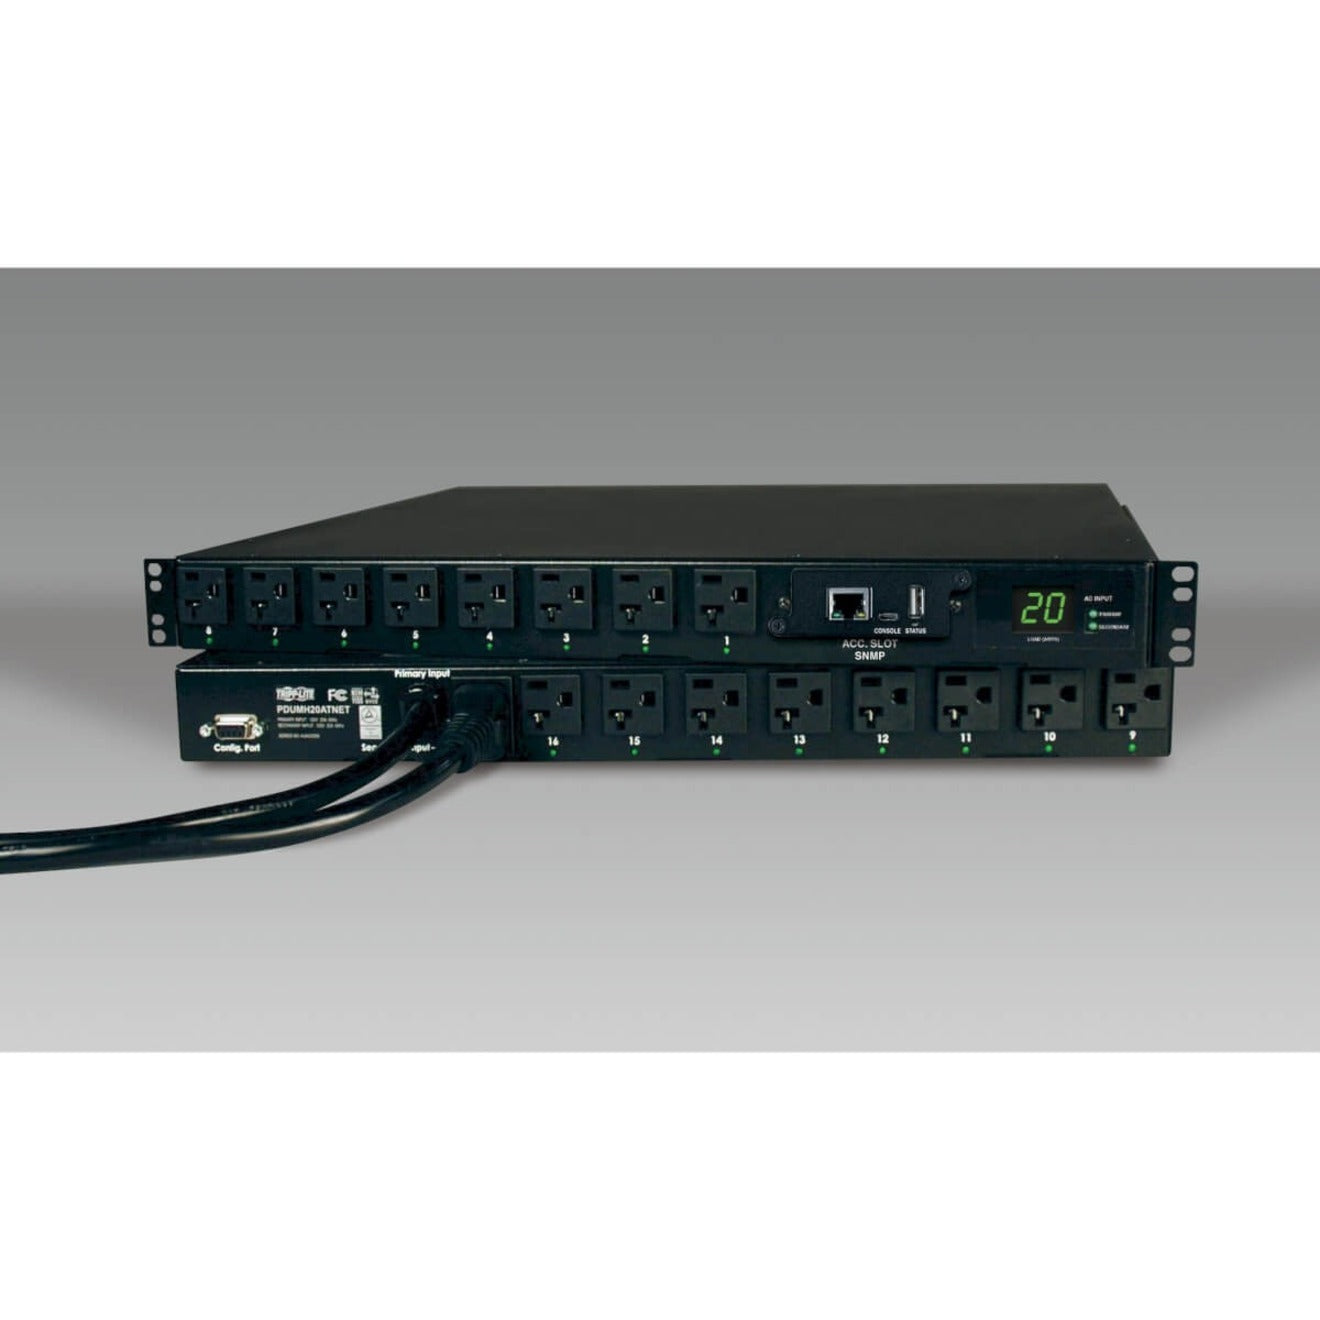 Tripp Lite PDUMH20ATNET PDU Switched ATS 120V 20A 16 Outlet, Integrated Automatic Transfer Switch, Web Monitoring